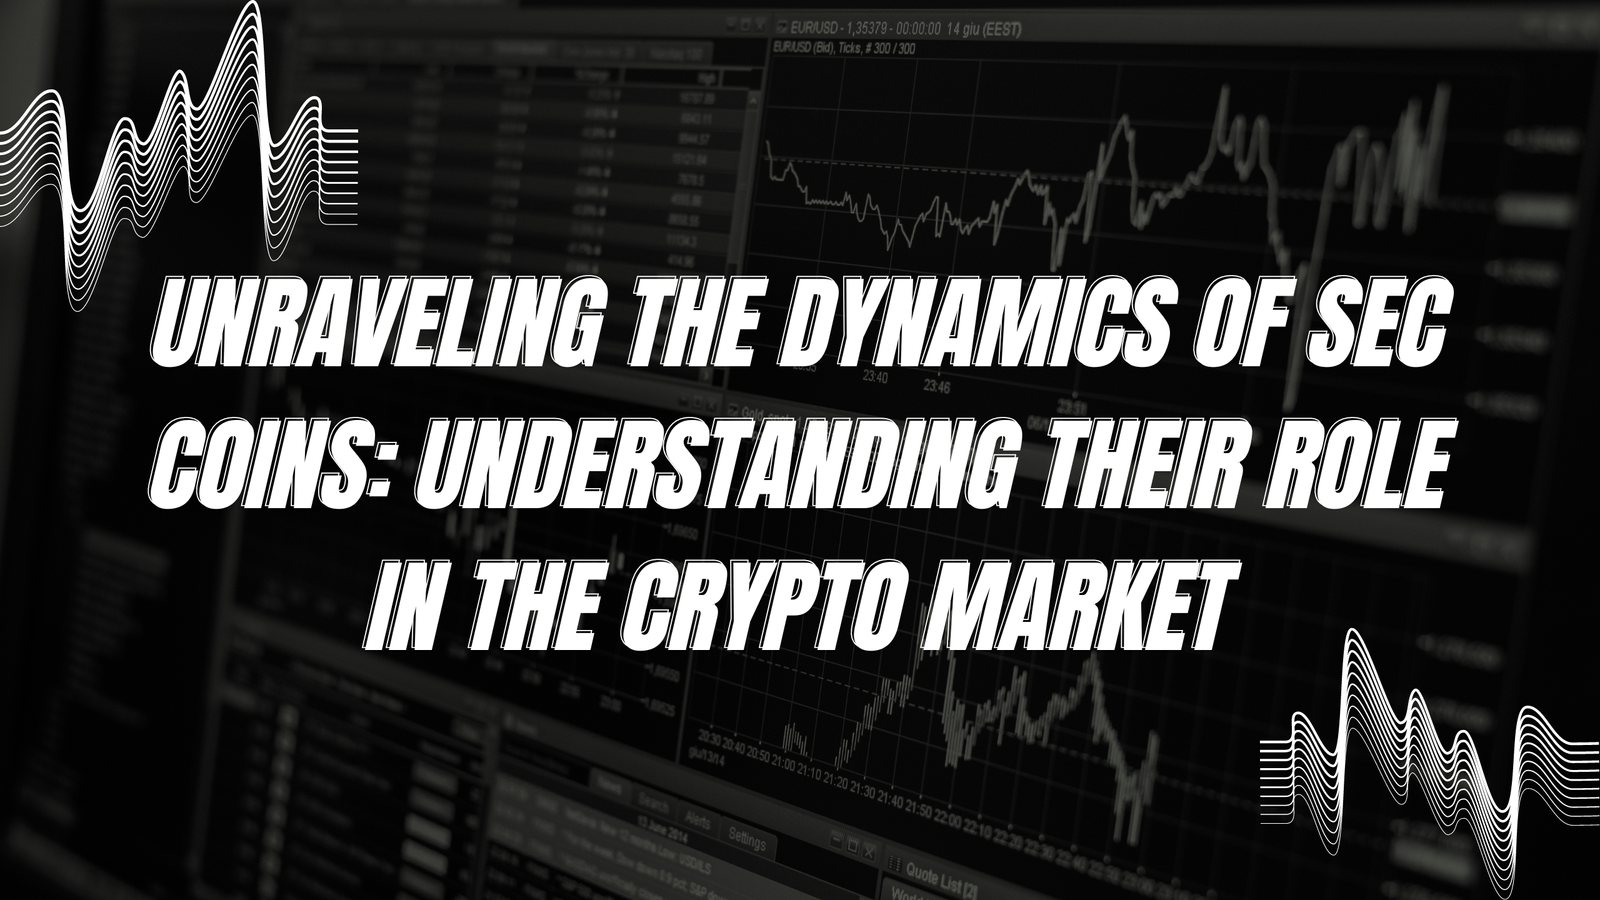 Unraveling the Dynamics of SEC Coins: Understanding Their Role in the Crypto Market